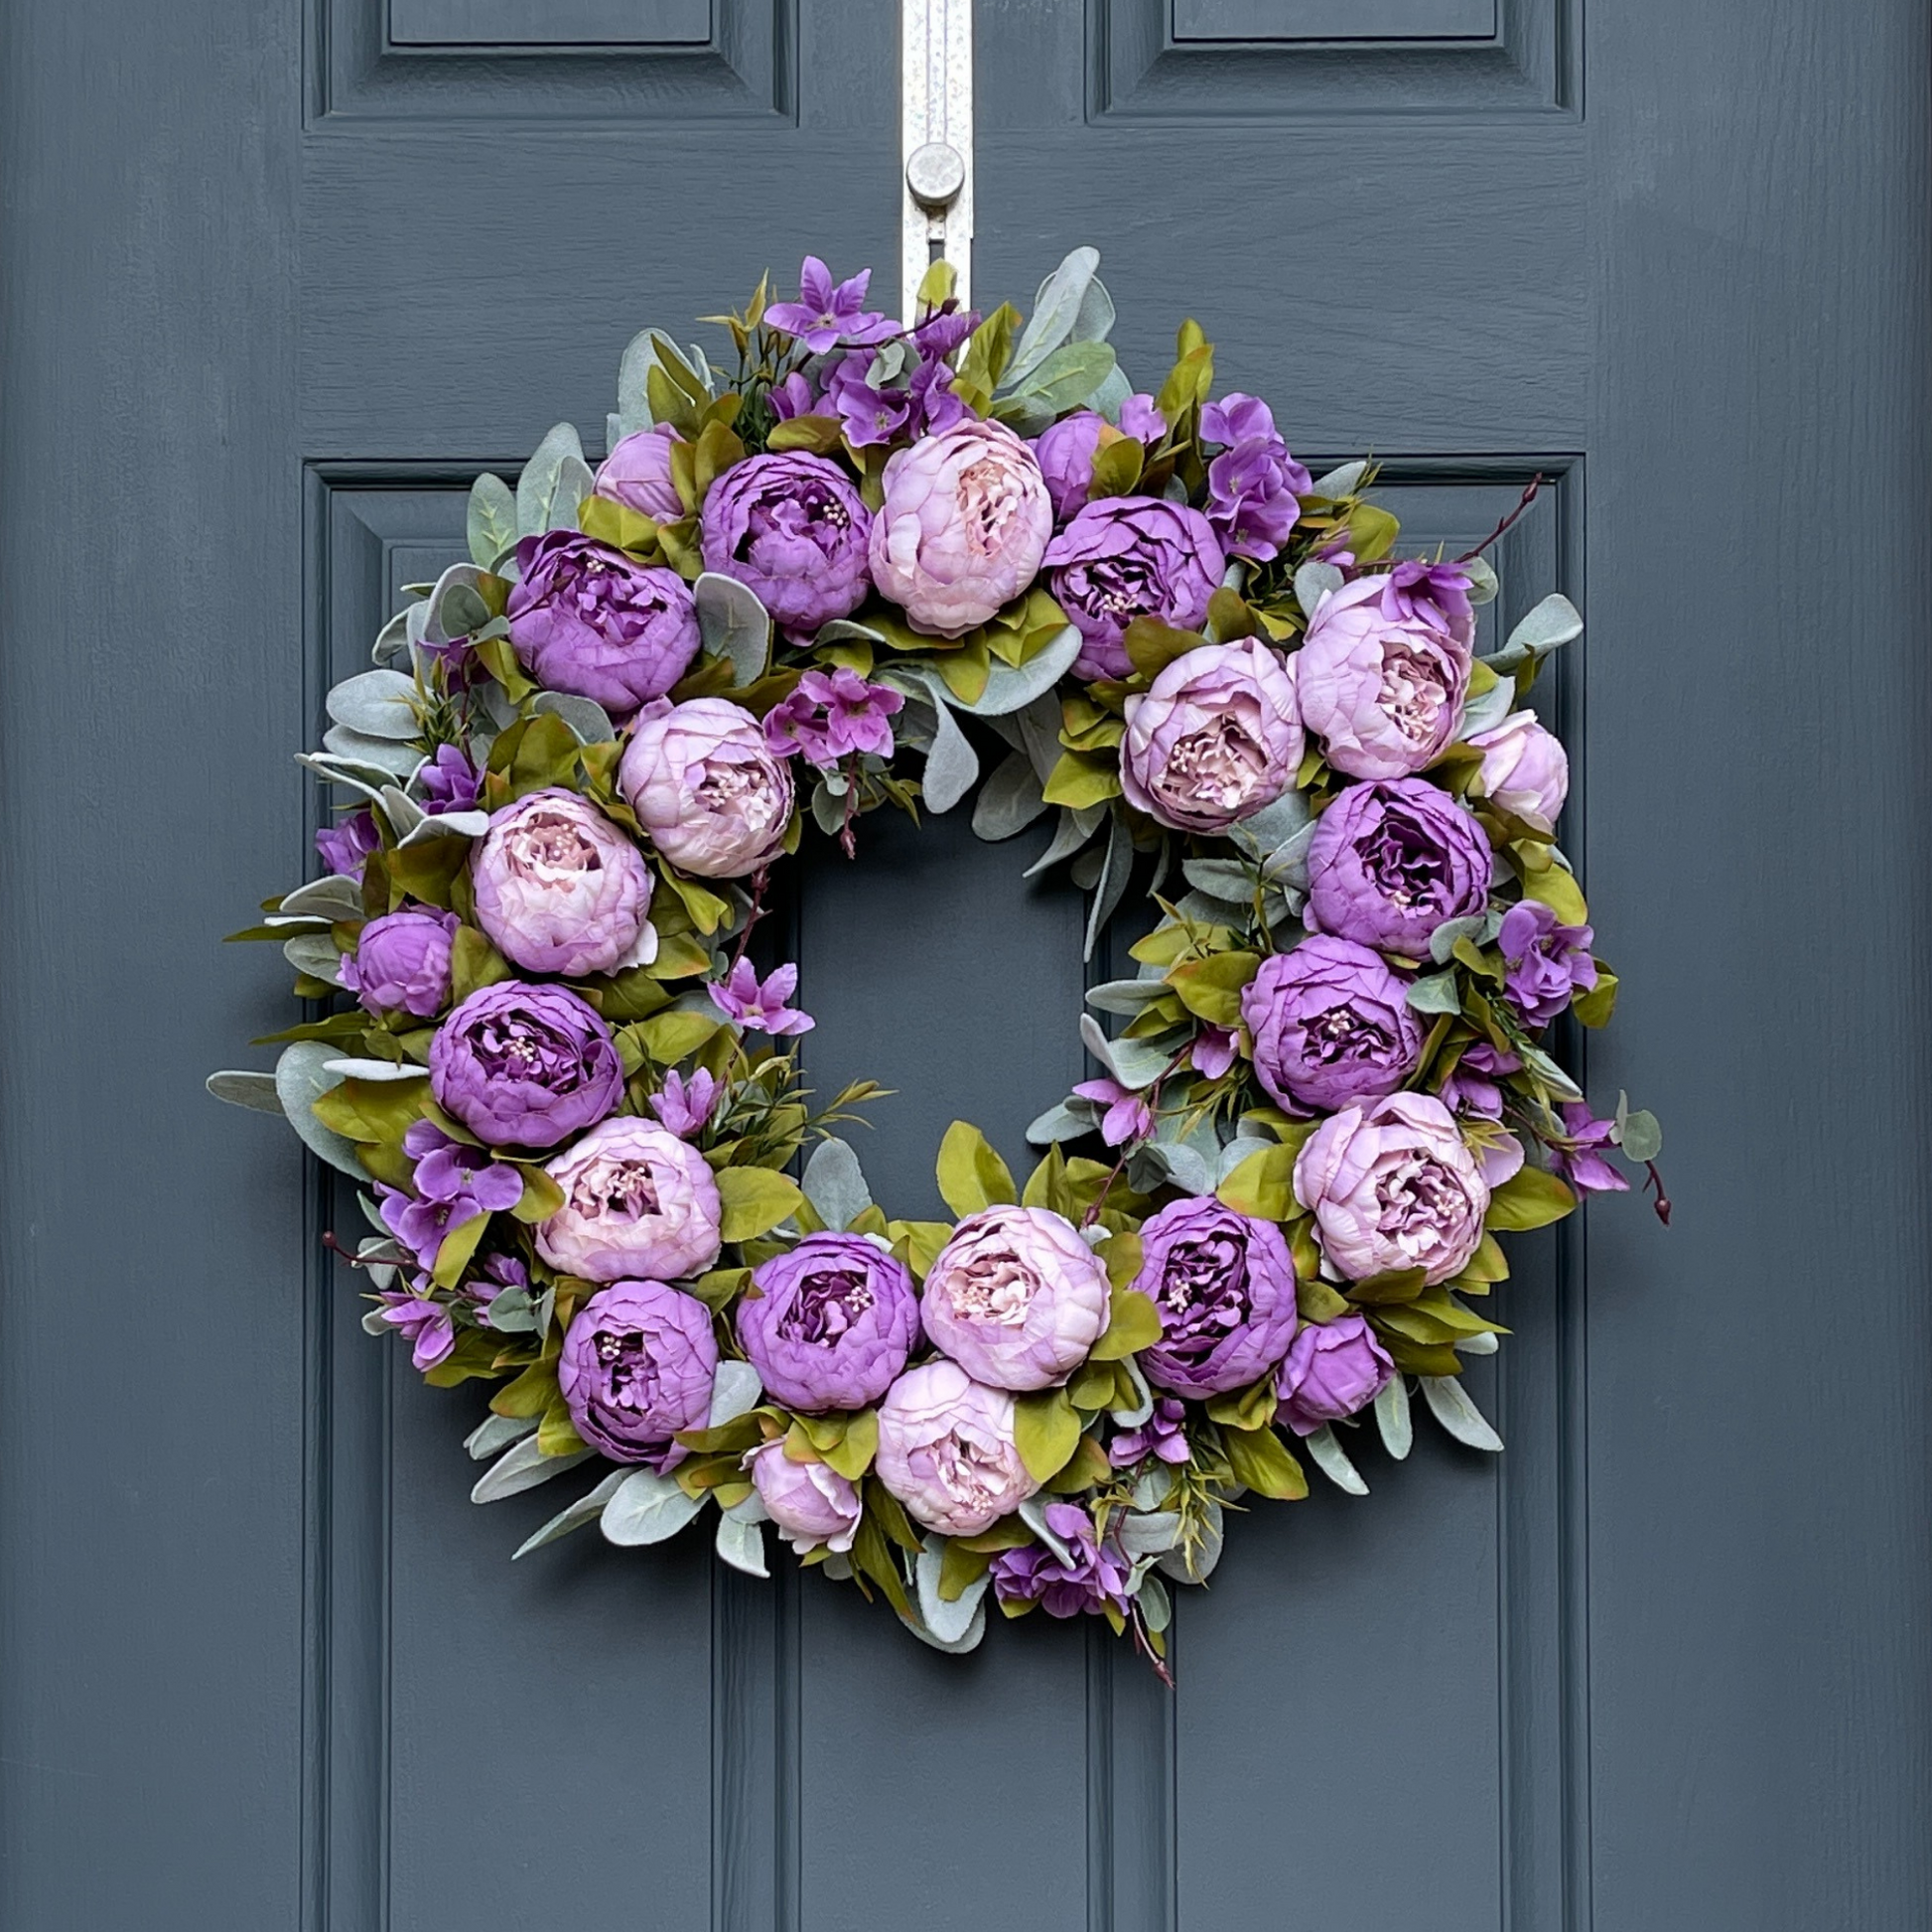 Spring Wreath, Summer Wreath, Peony Wreath, Purple Peonies, Large Daisy  Wreath, Floral Wreath, Wreath for Spring and Summer, Front Door Wreaths,  Home